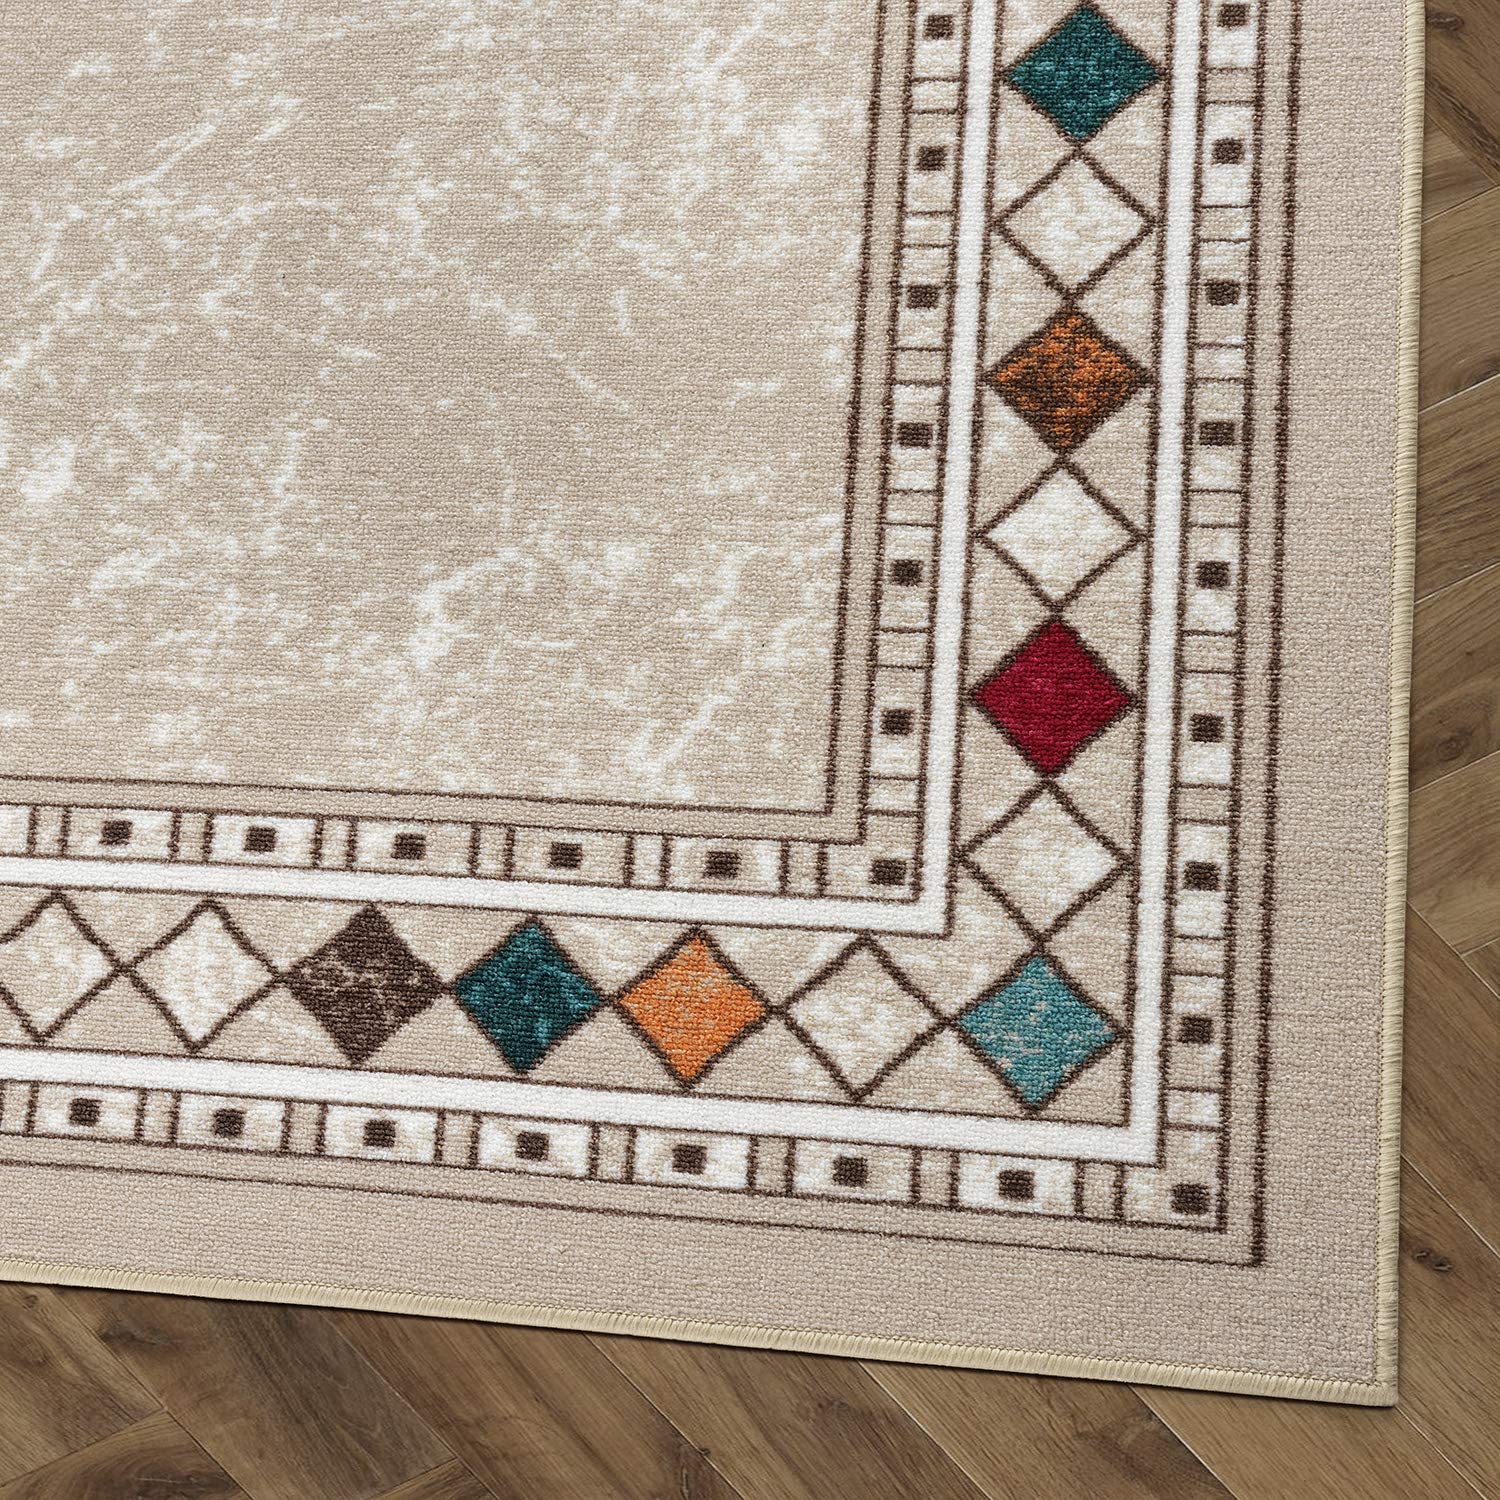 Antep Rugs Alfombras Modern Bordered 2x4 Non-Skid (Non-Slip) Low Profile Pile Rubber Backing Kitchen Area Rugs (Beige, 2'3 x 4')